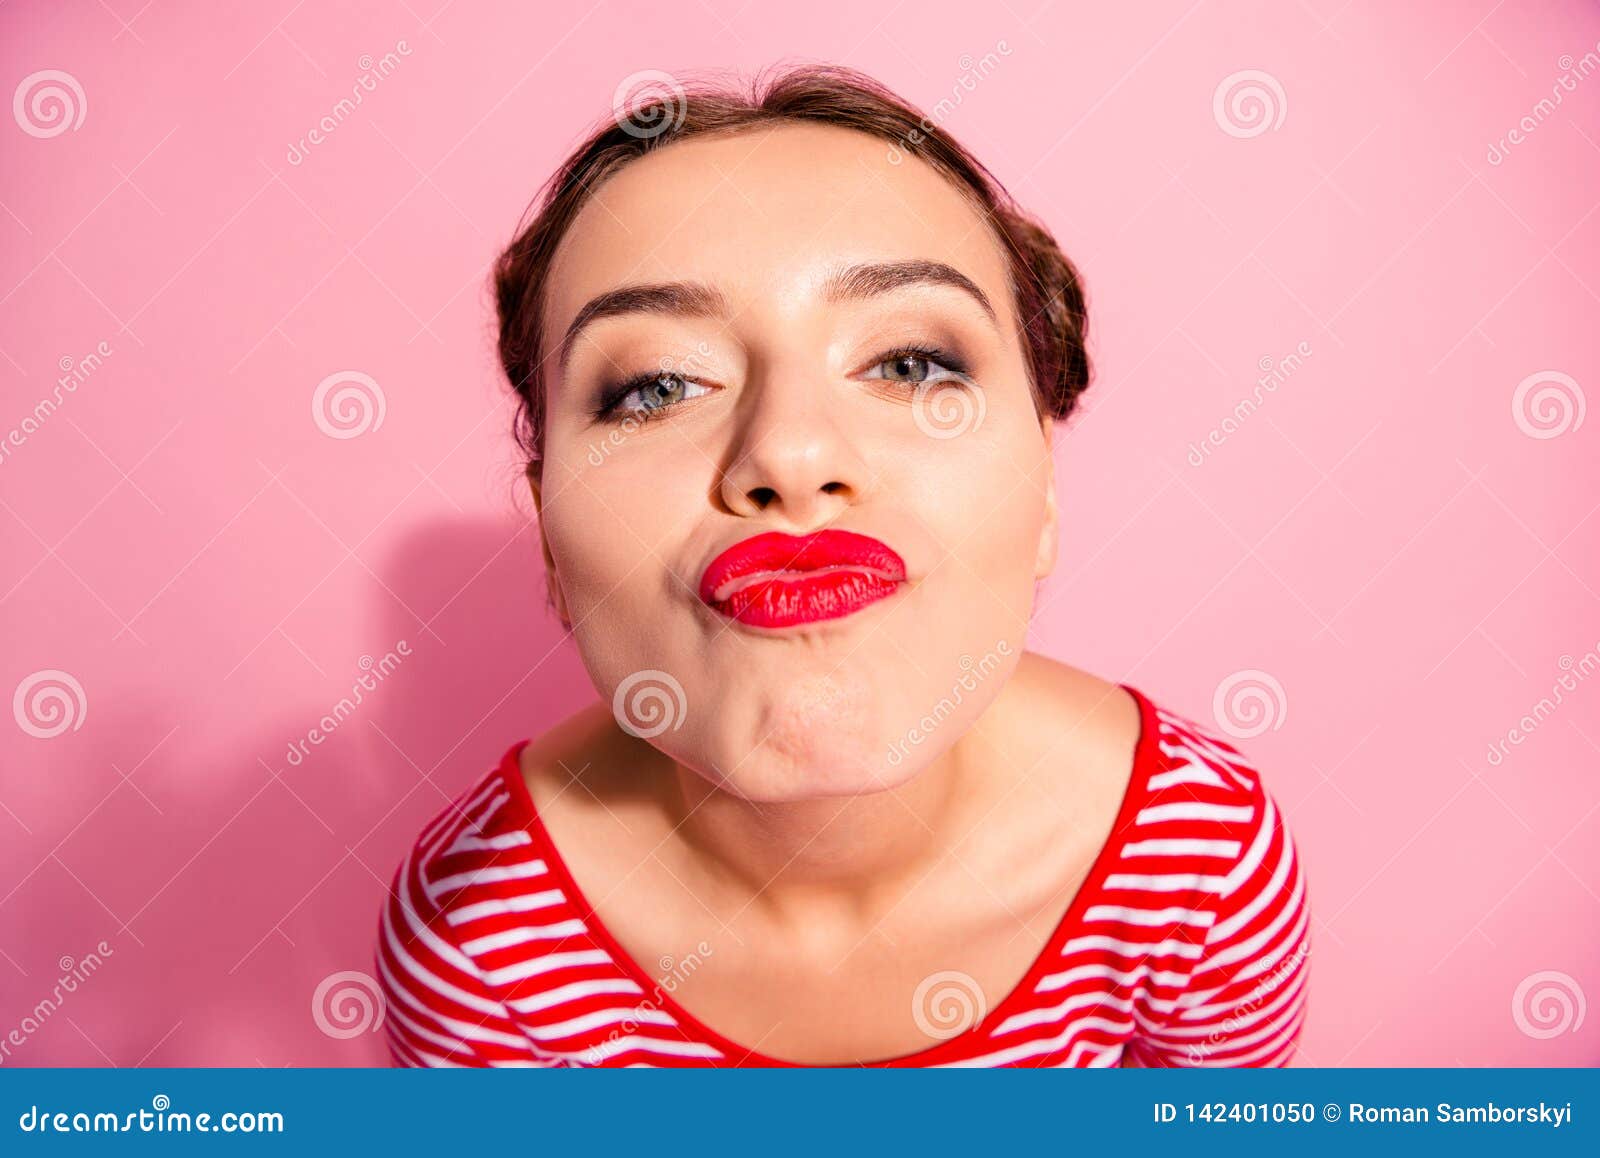 Close Up Portrait Of Her She Nice Looking Cute Attractive Glamorous Cheerful Cheery Crazy Girl